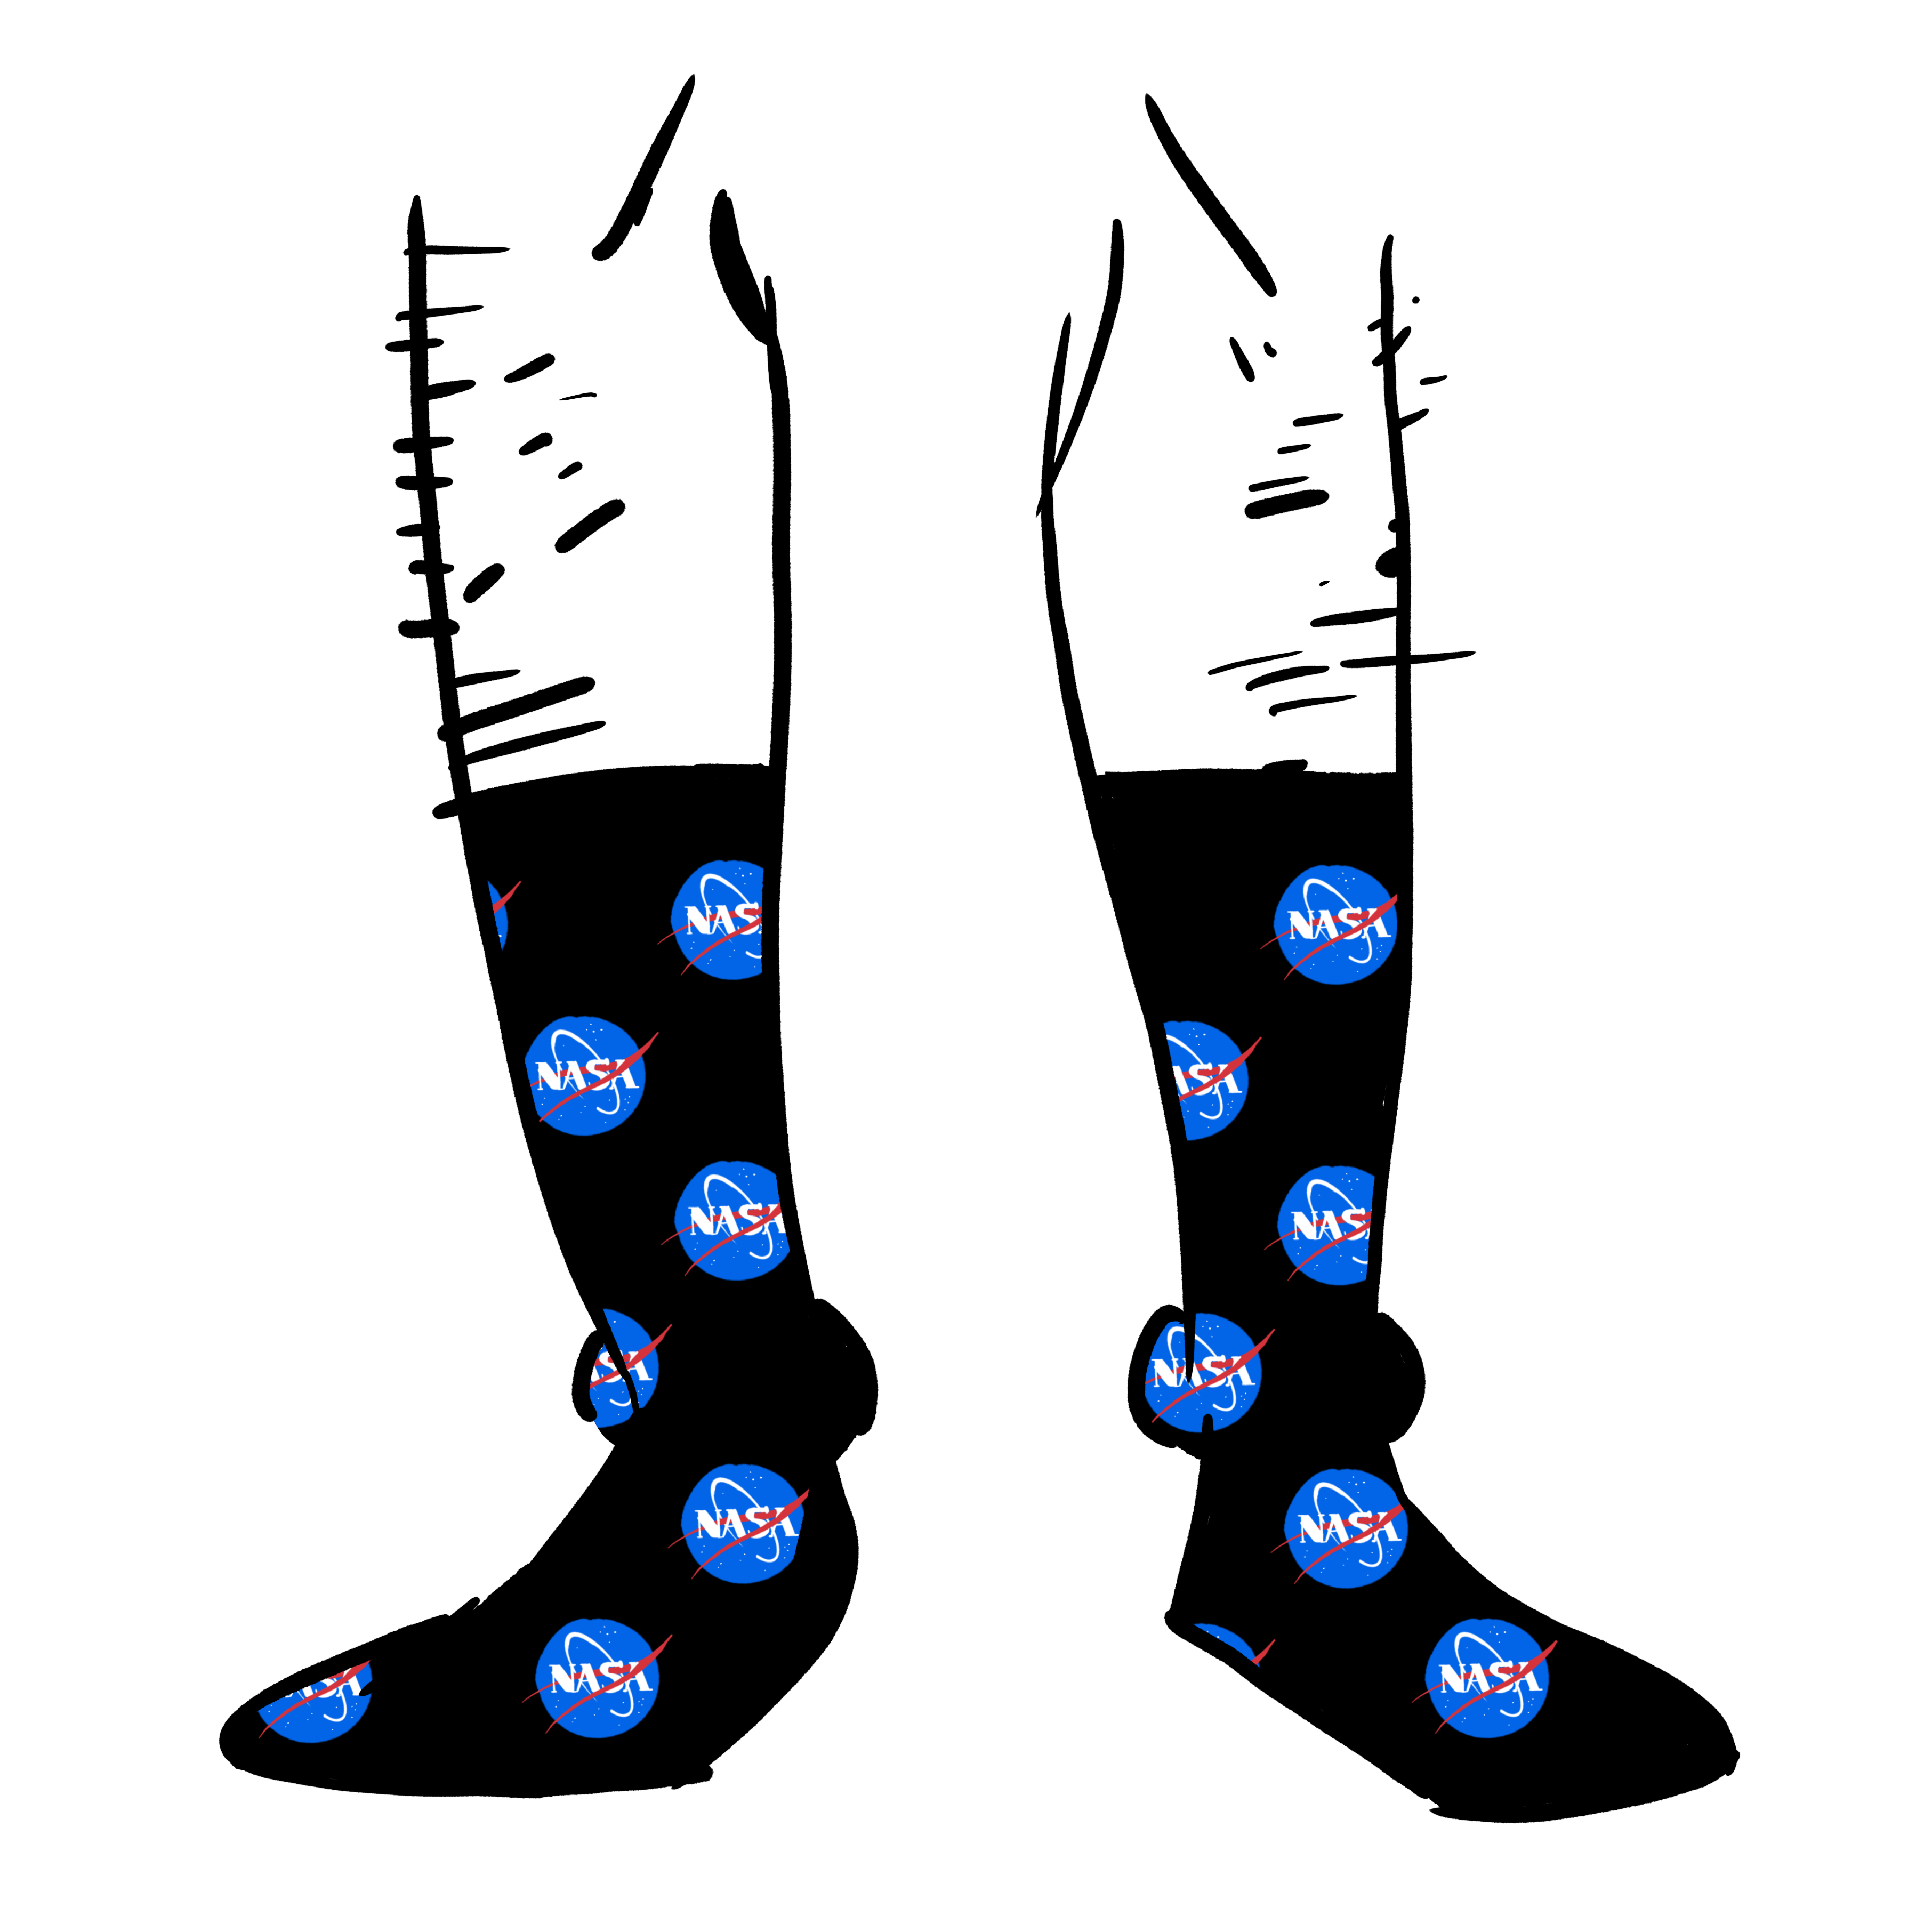 Black socks with the NASA meatball logo shown in a pattern